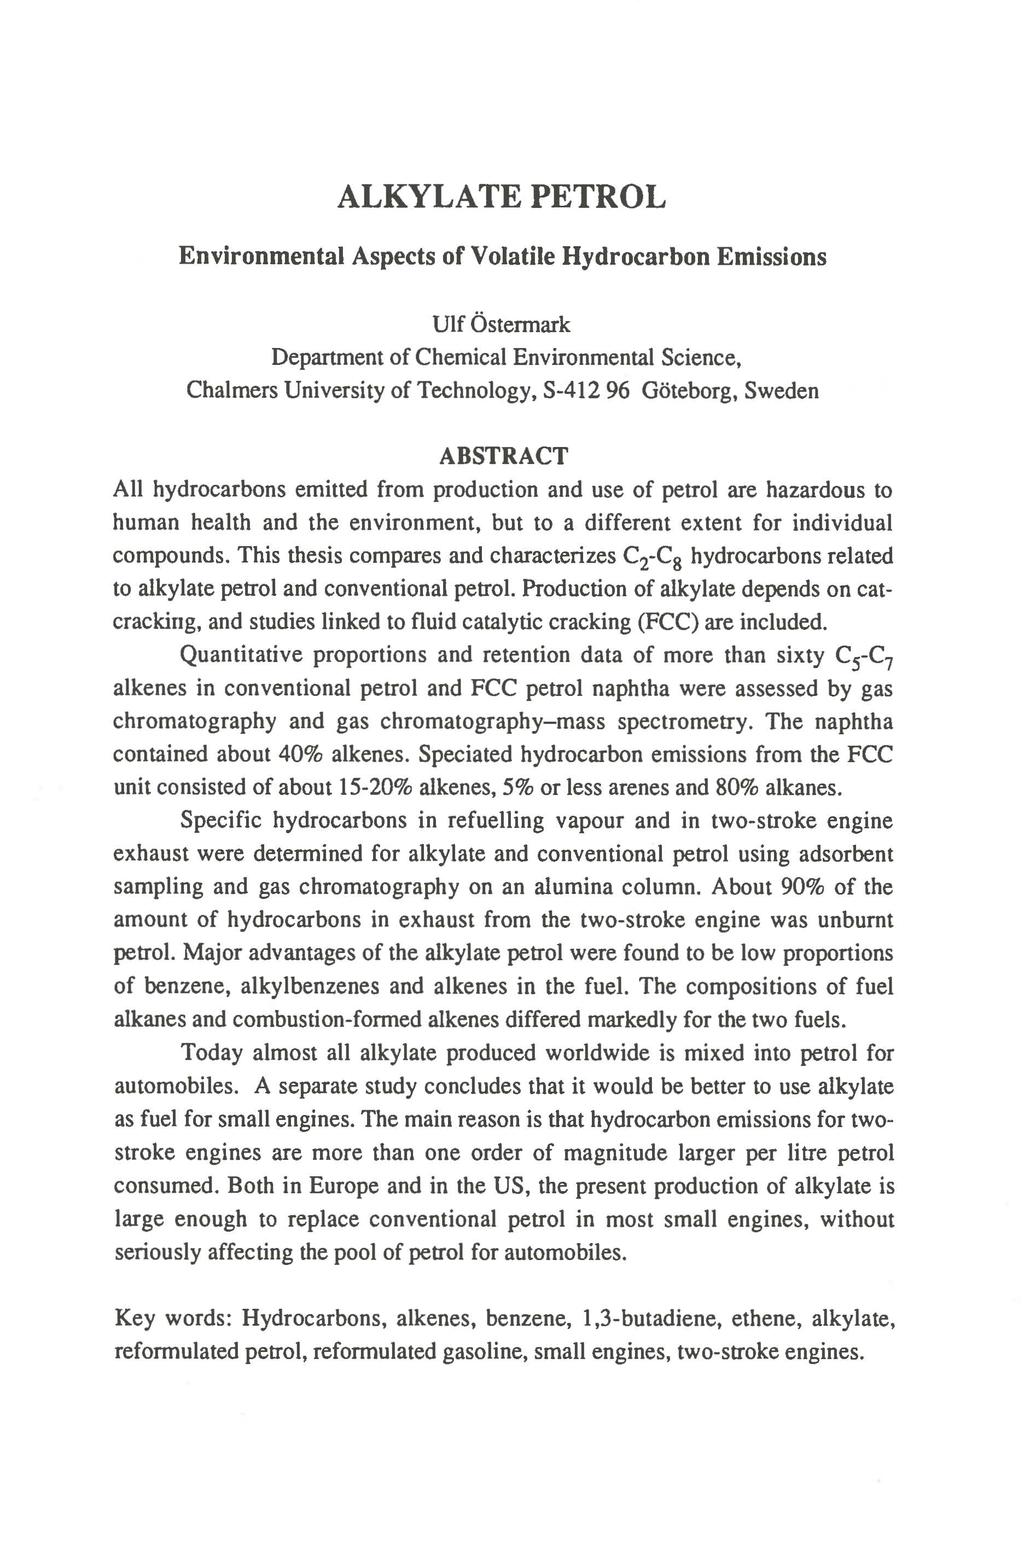 ALKYLATE PETROL Environmental Aspects of Volatile Hydrocarbon Emissions Ulf Ostennark Department of Chemical Environmental Science, Chalmers University of Technology, S-412 96 Goteborg, Sweden